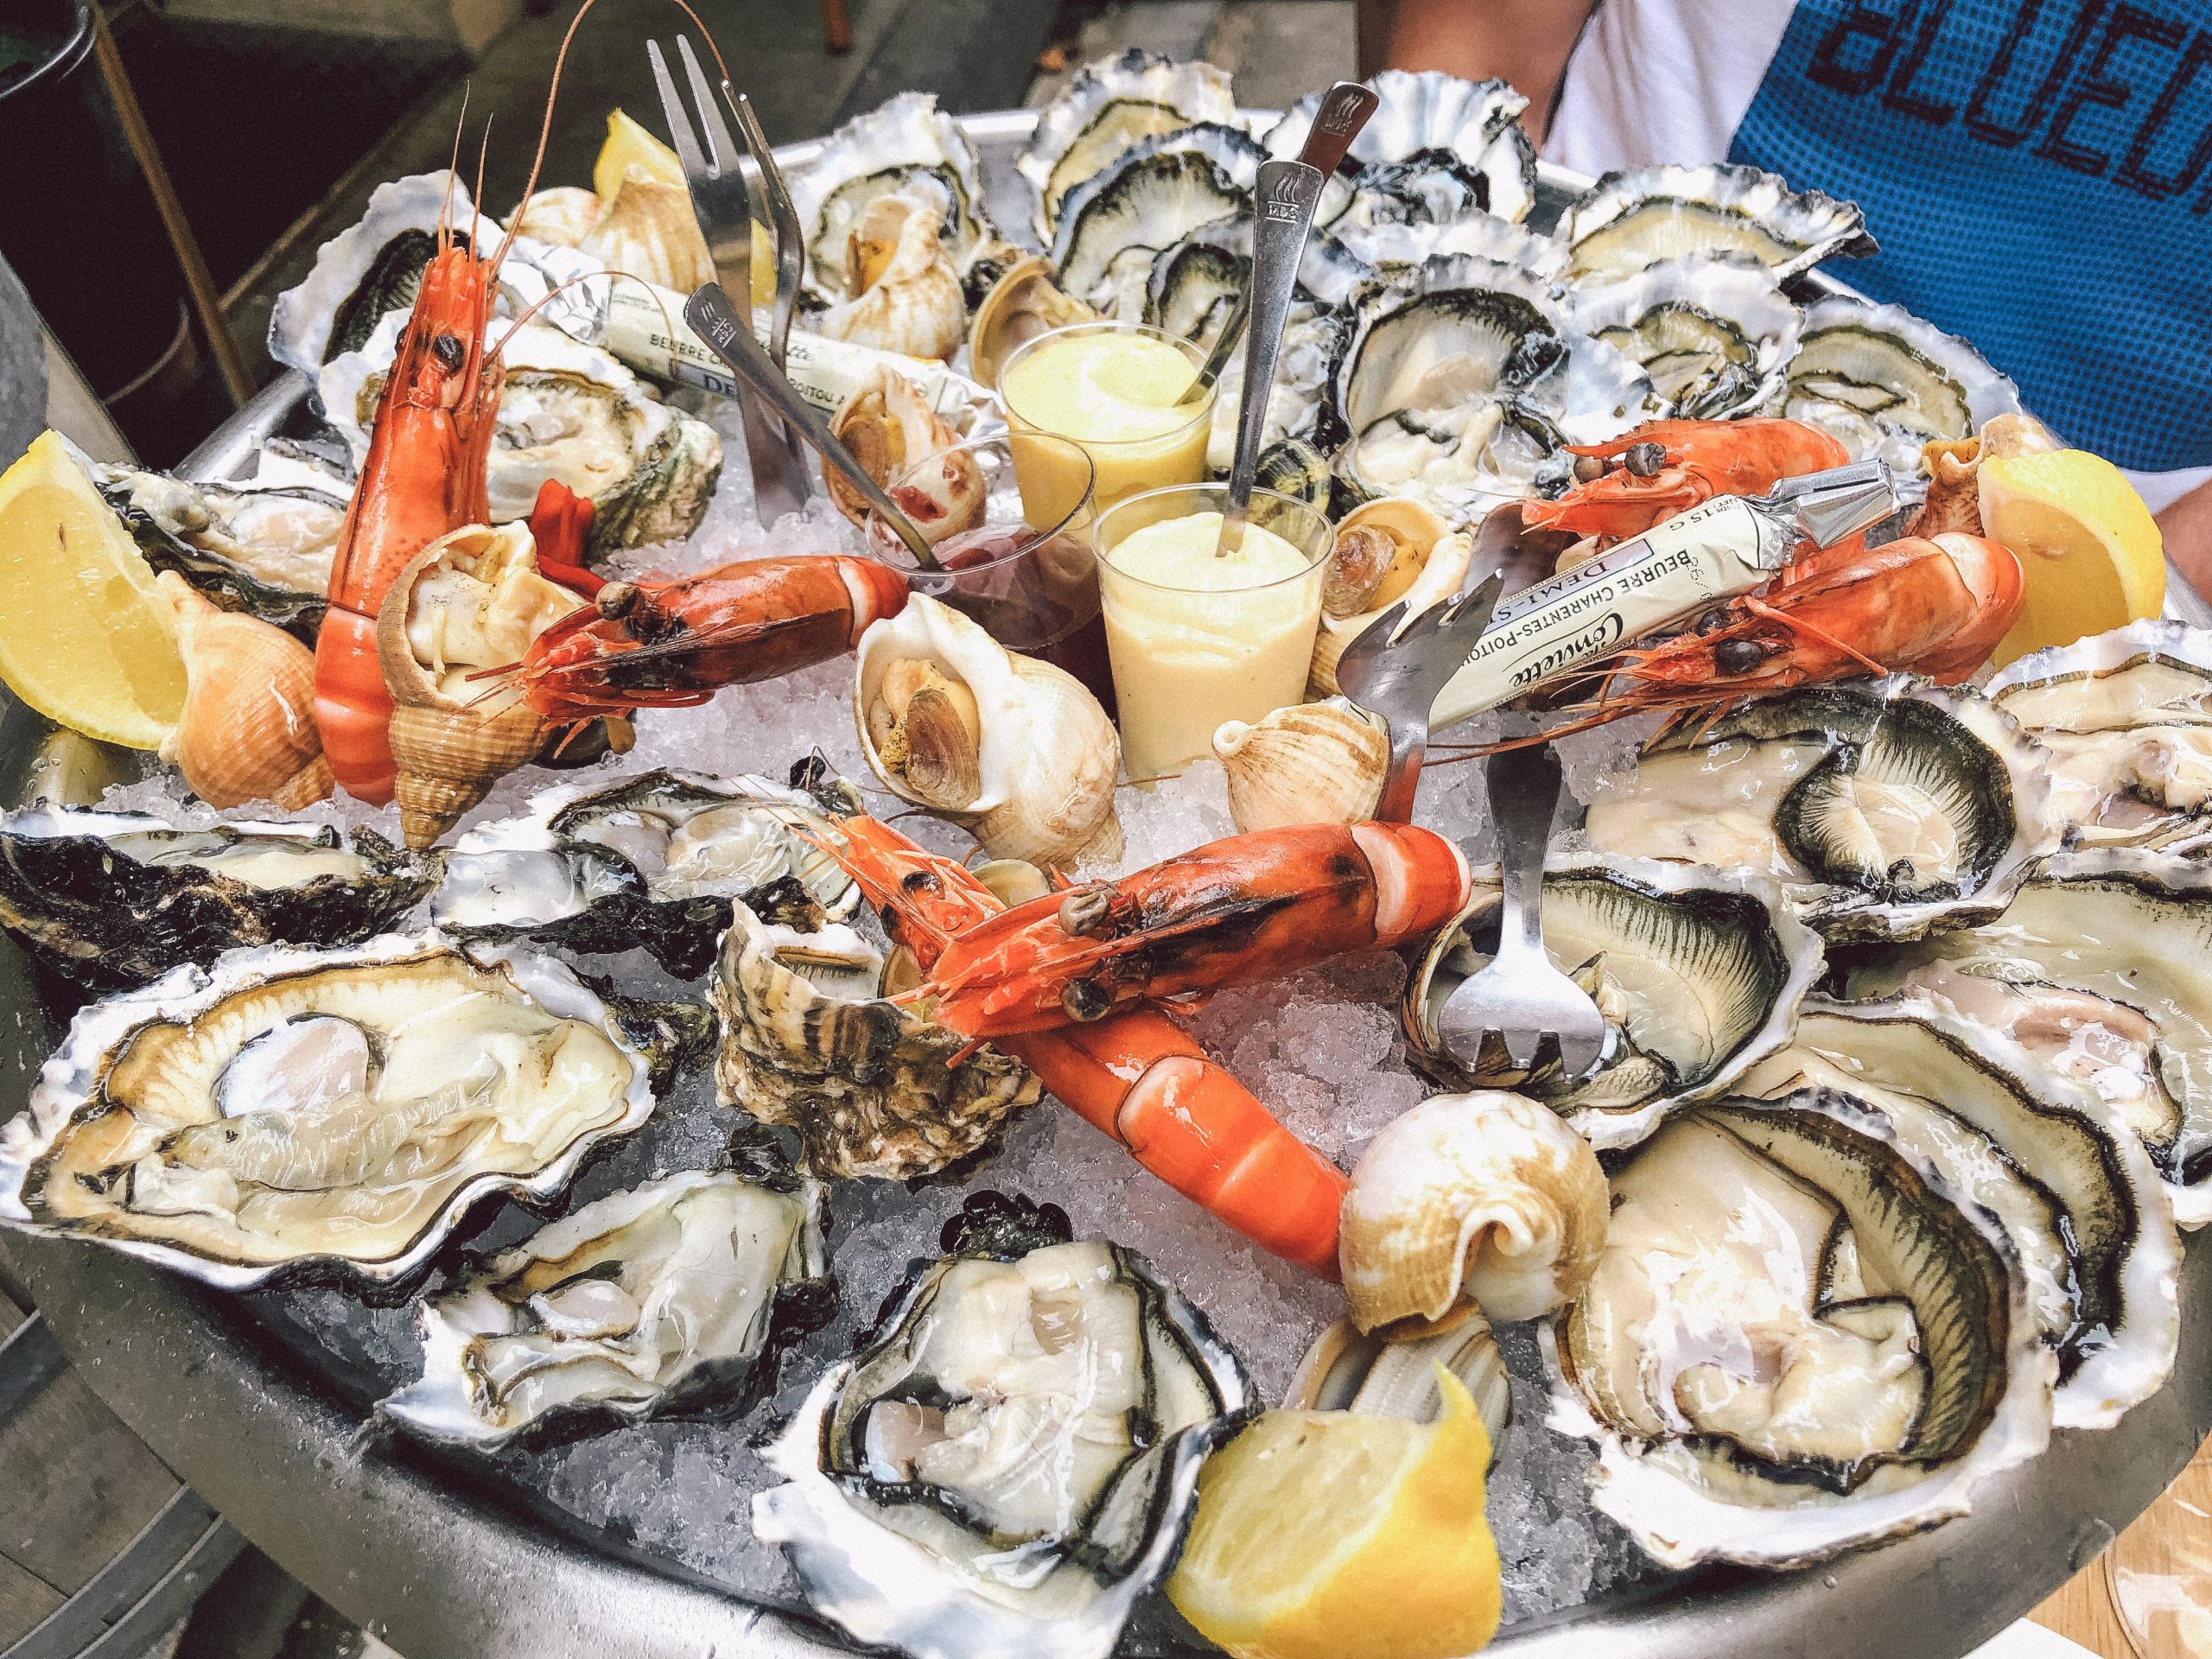 Platter full of oysters in France